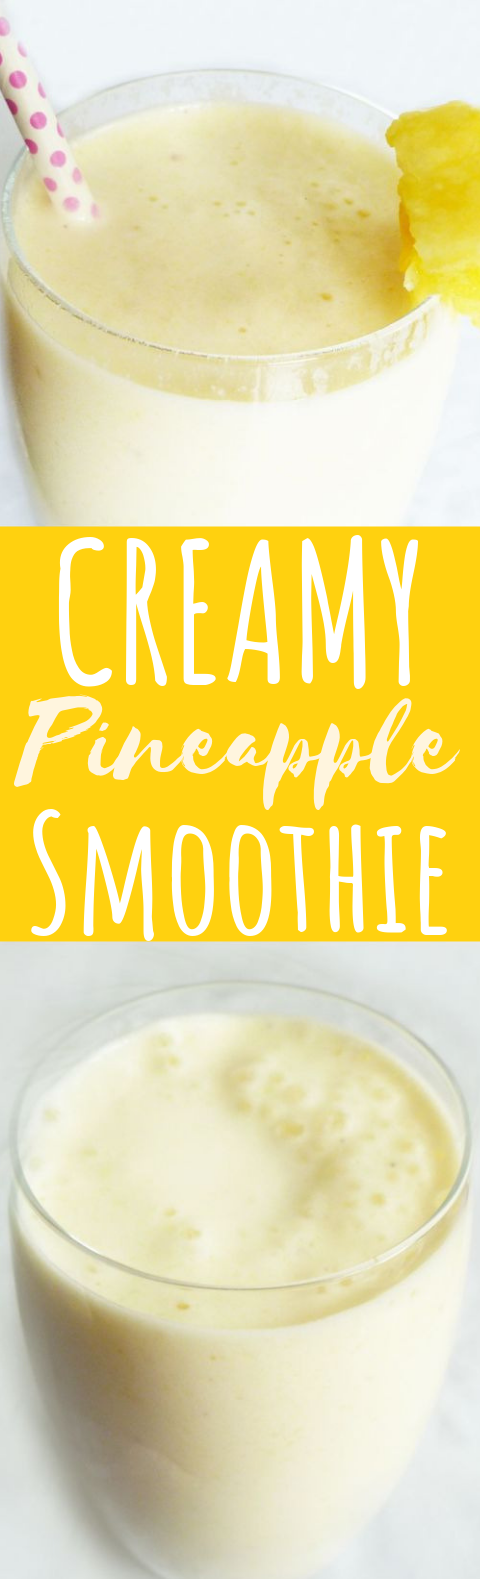 Creamy Pineapple Smoothie #drinks #smoothies